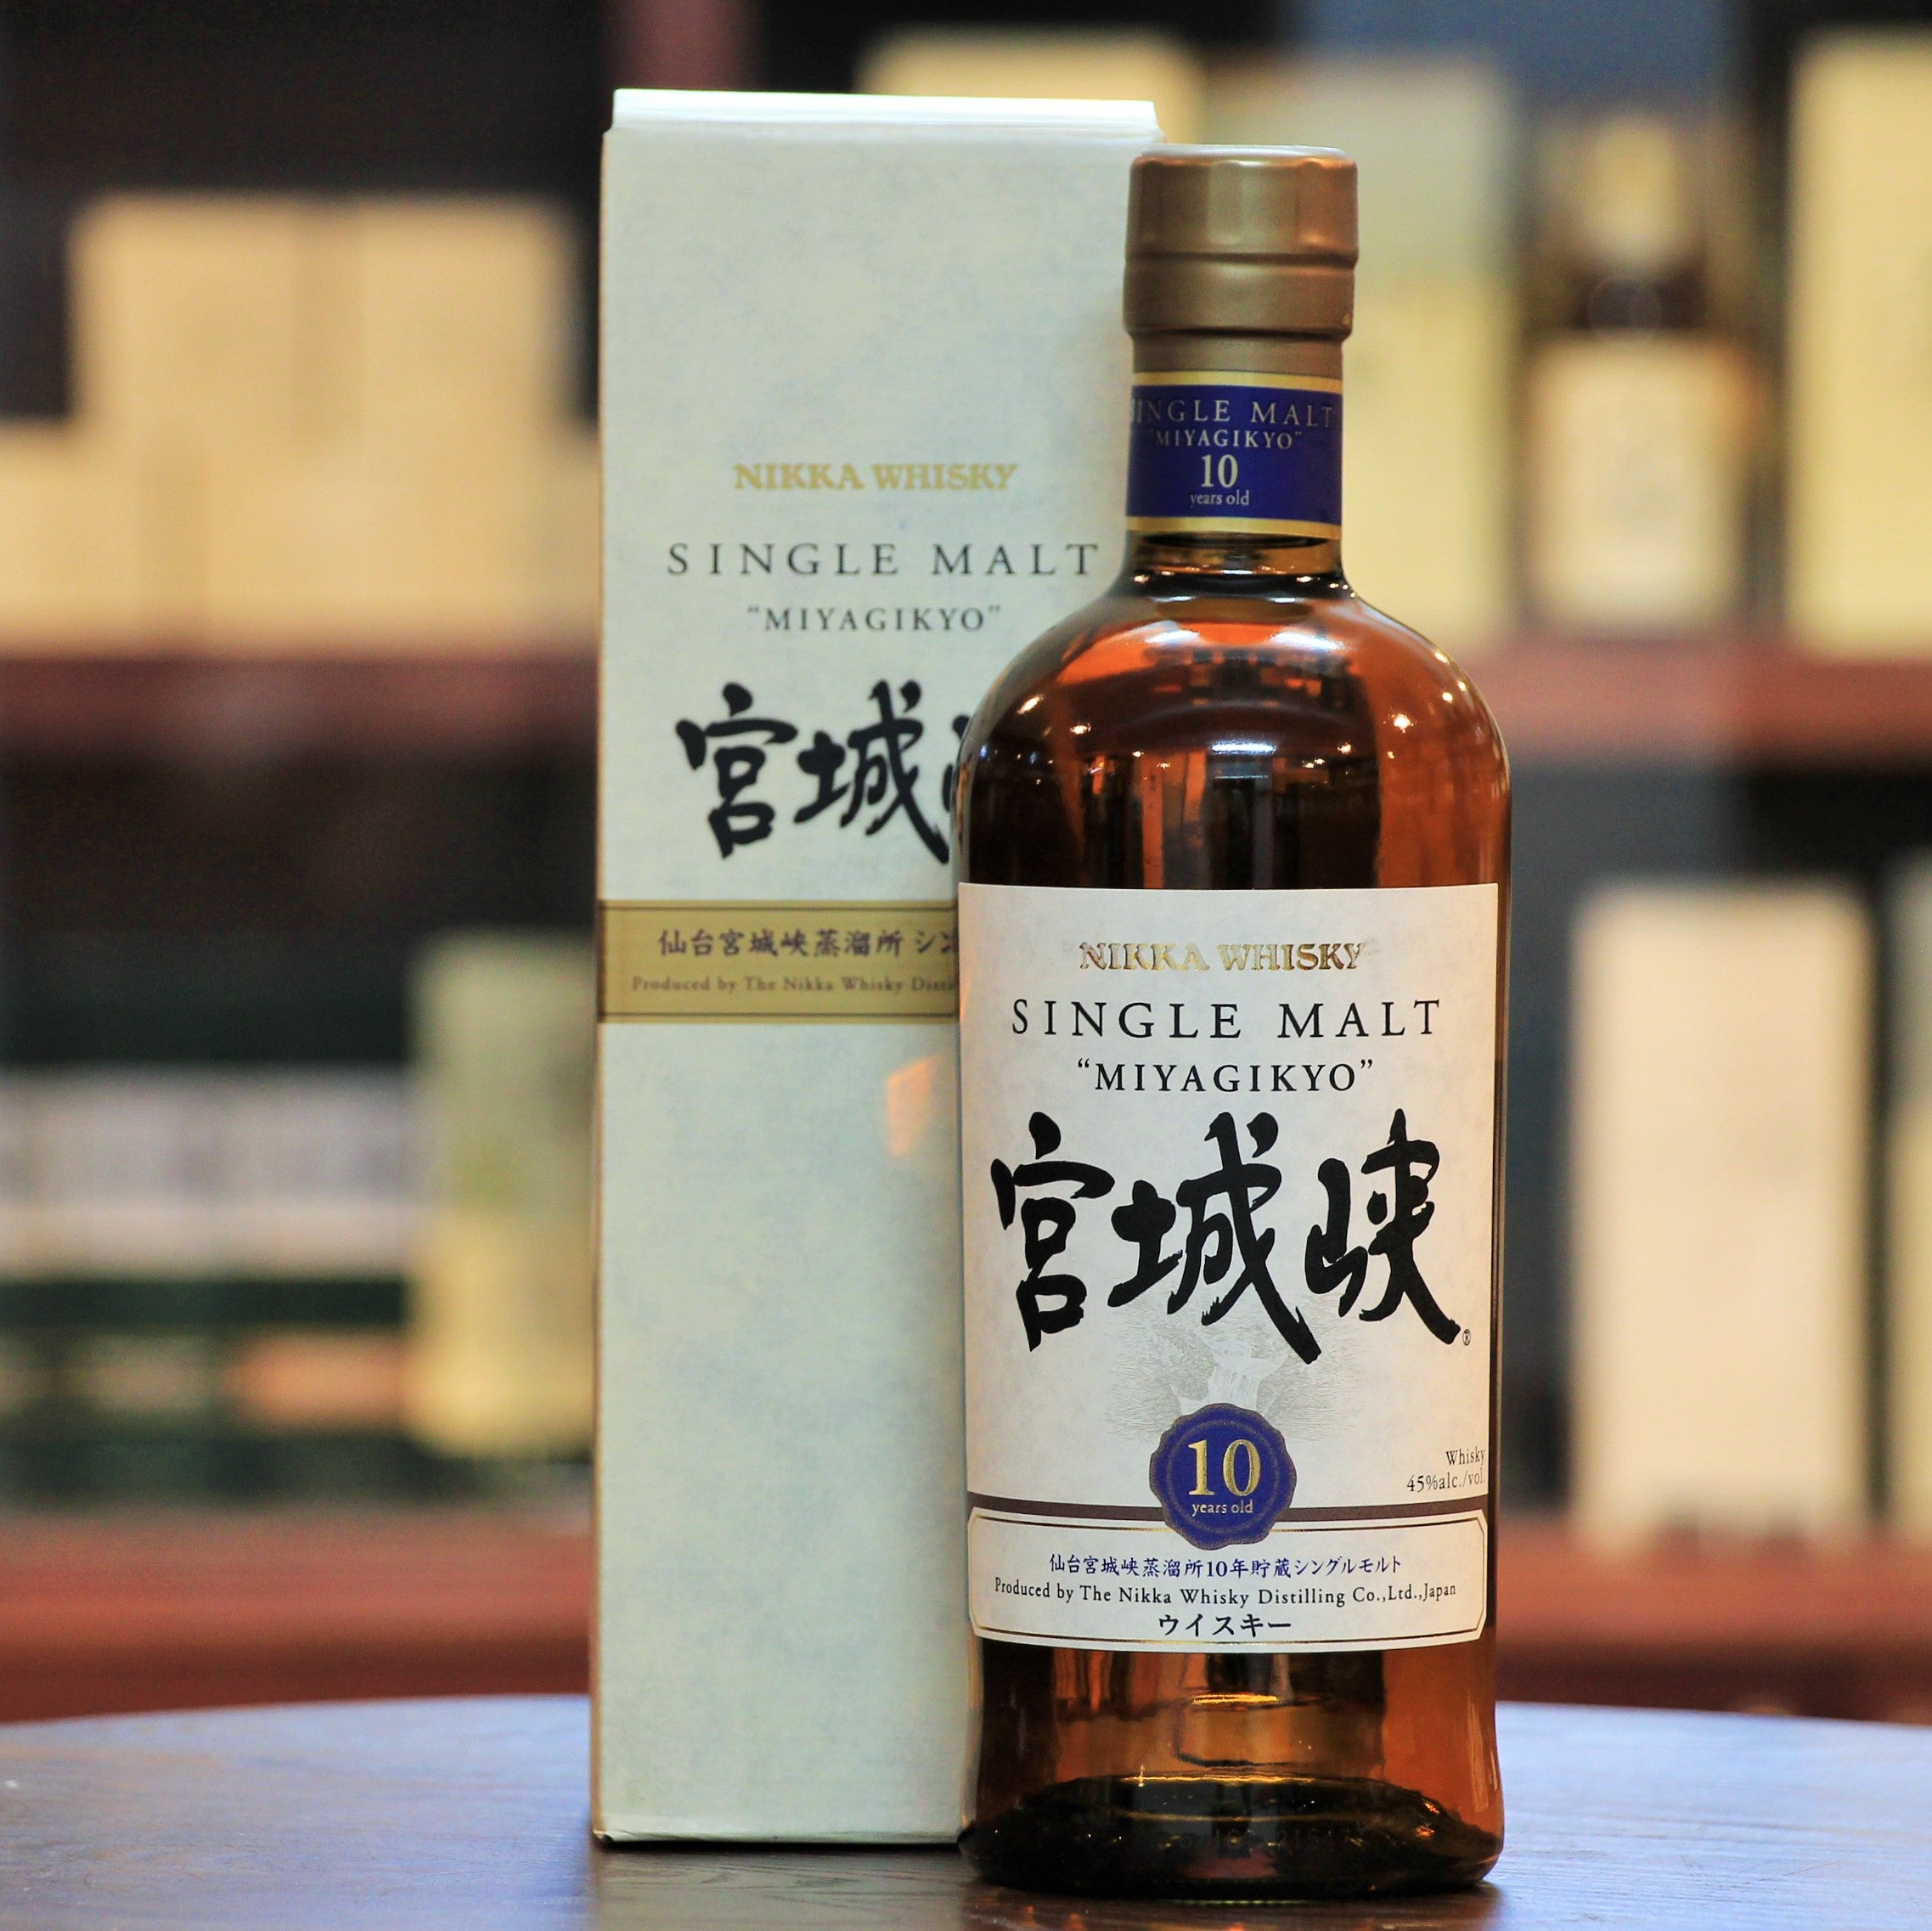 Miyagikyo 10 Years Single Malt Whisky, Fresh citrus and stewed fruits. Very crisp, fresh and enjoyable and a great entry to the aged whiskies from this distillery located in Sendai in Northern Japan. Sadly discontinued and a rarity.